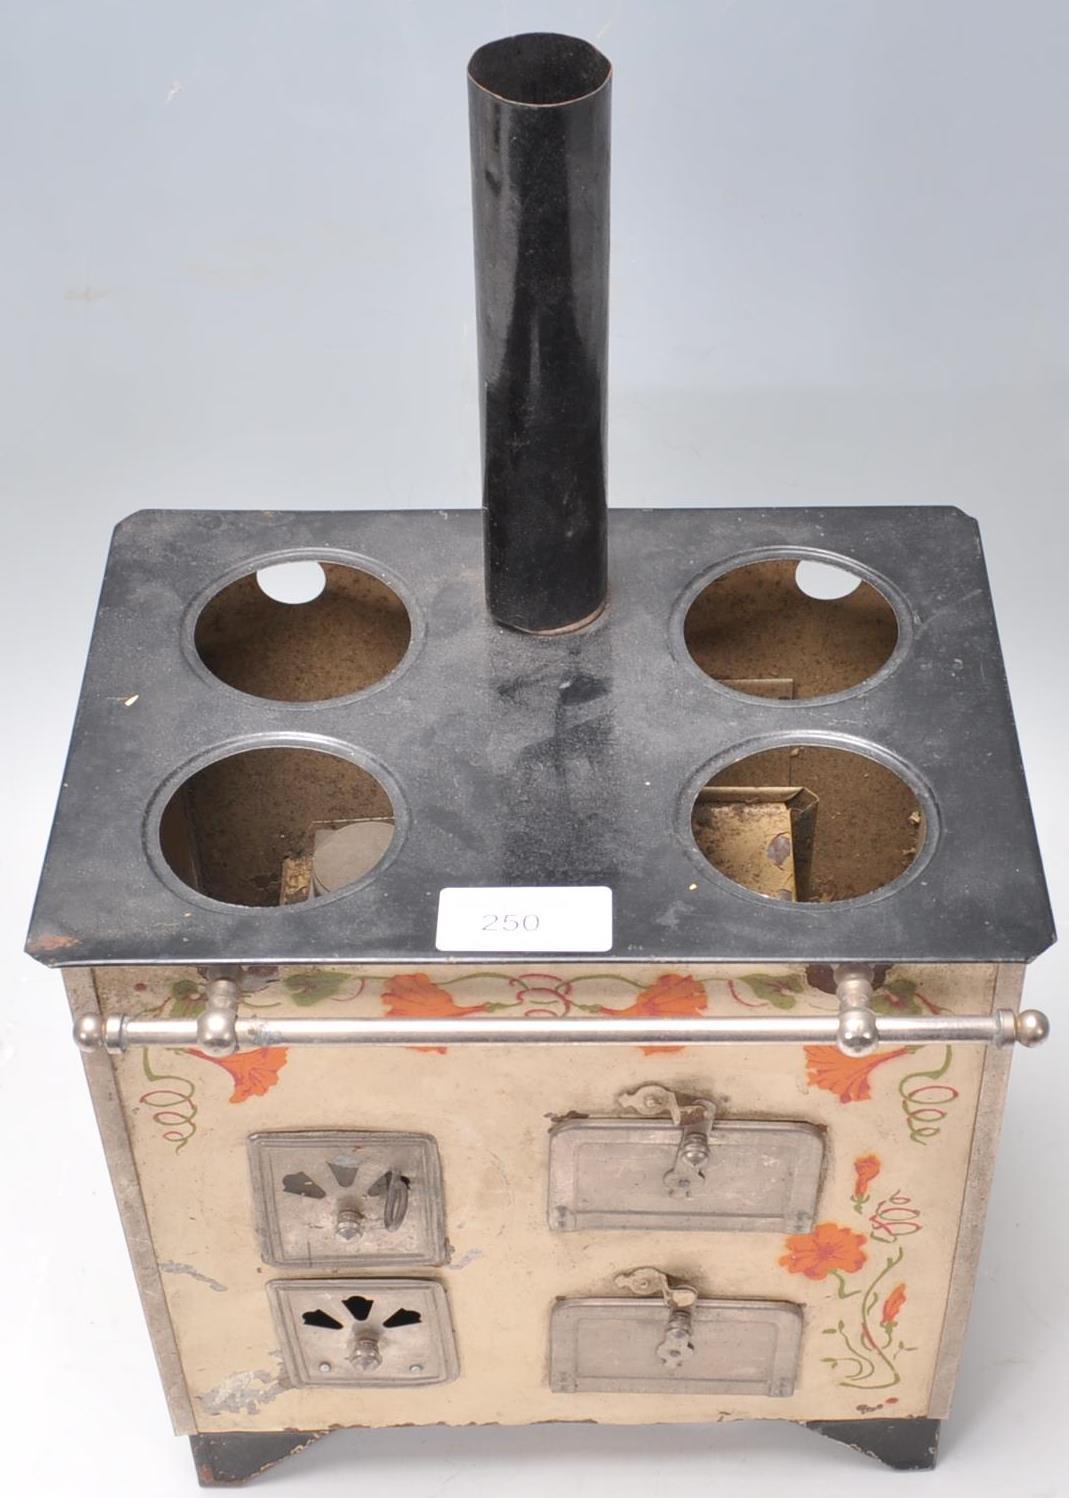 A vintage 20th Century tin model of a stove / oven - Image 3 of 9